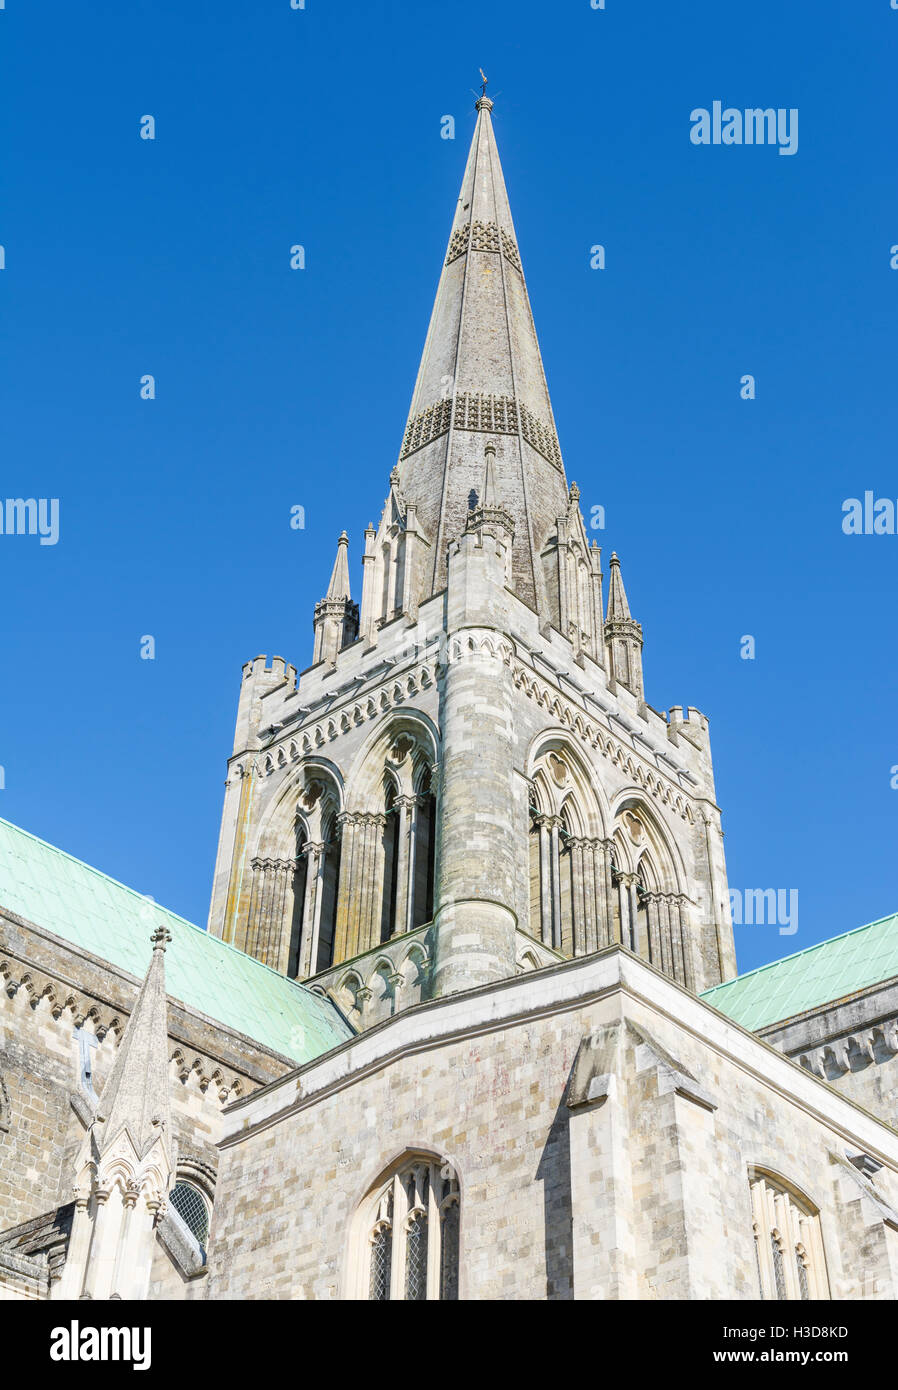 Spire on Chichester Cathedral against blue Sky in City of Chichester, West Sussex, England, UK. Stockfoto